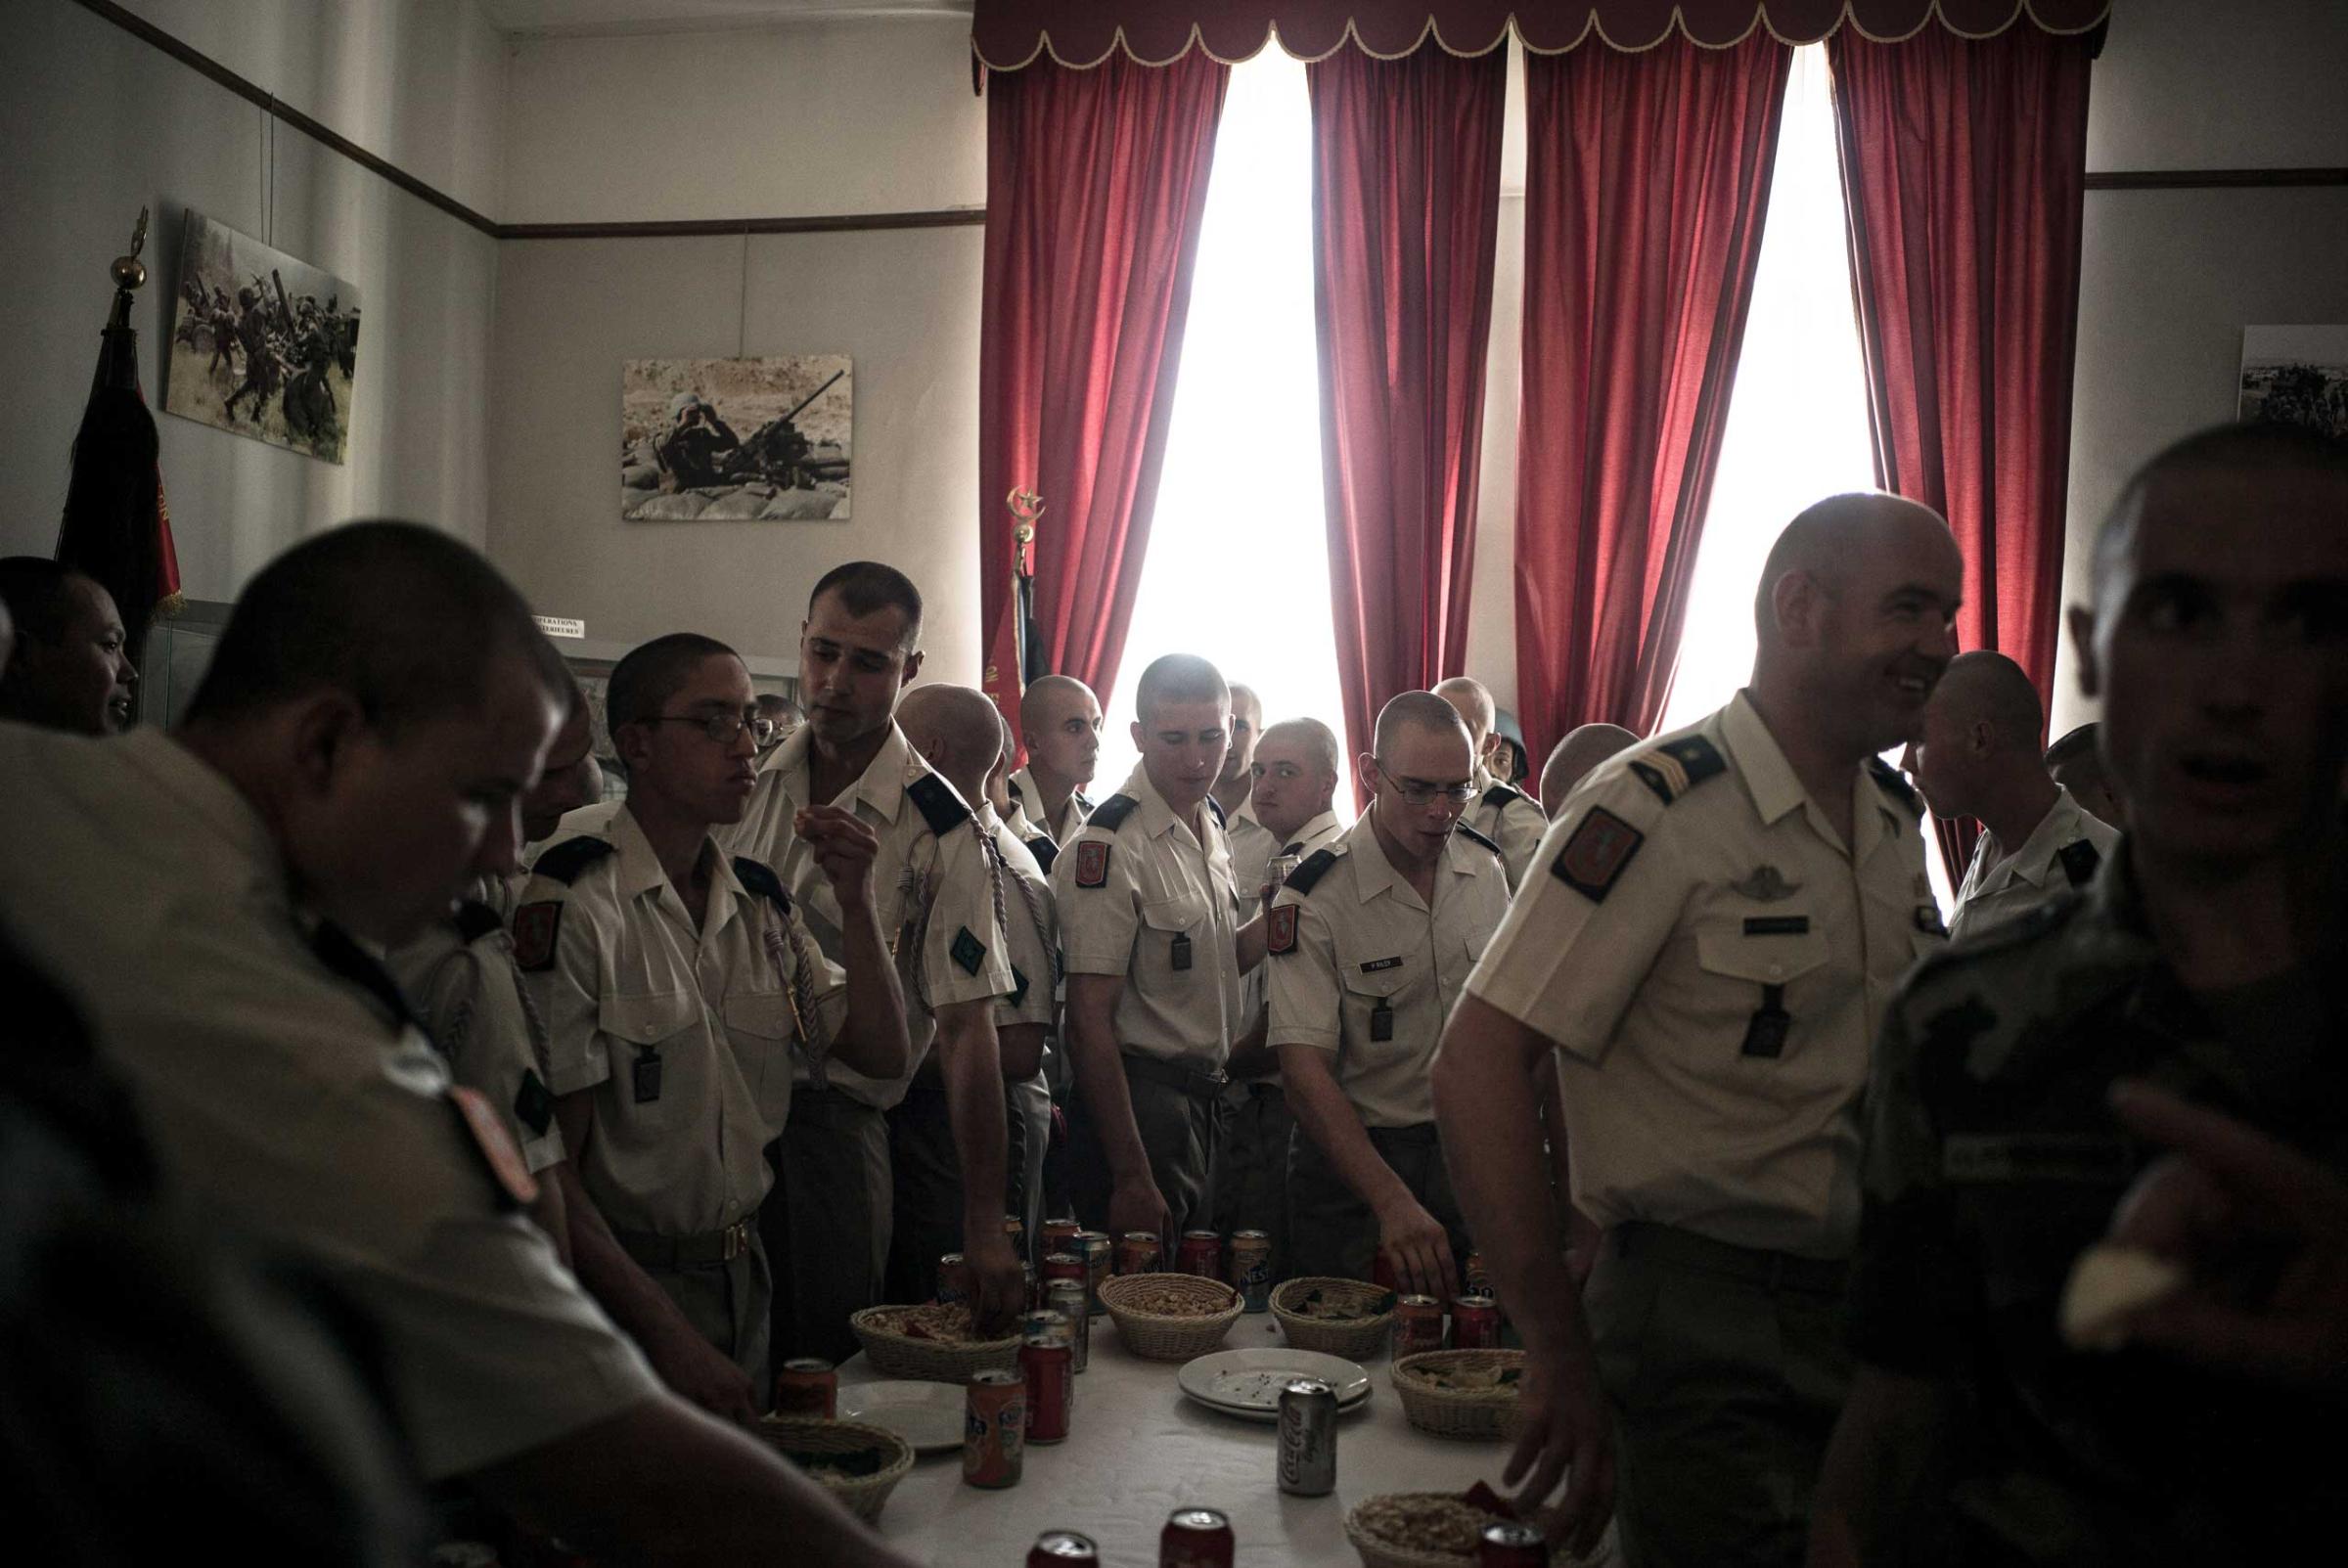 Members of the French Foreign Legion celebrate the end of their training. Nimes, France. Aug. 7, 2015.